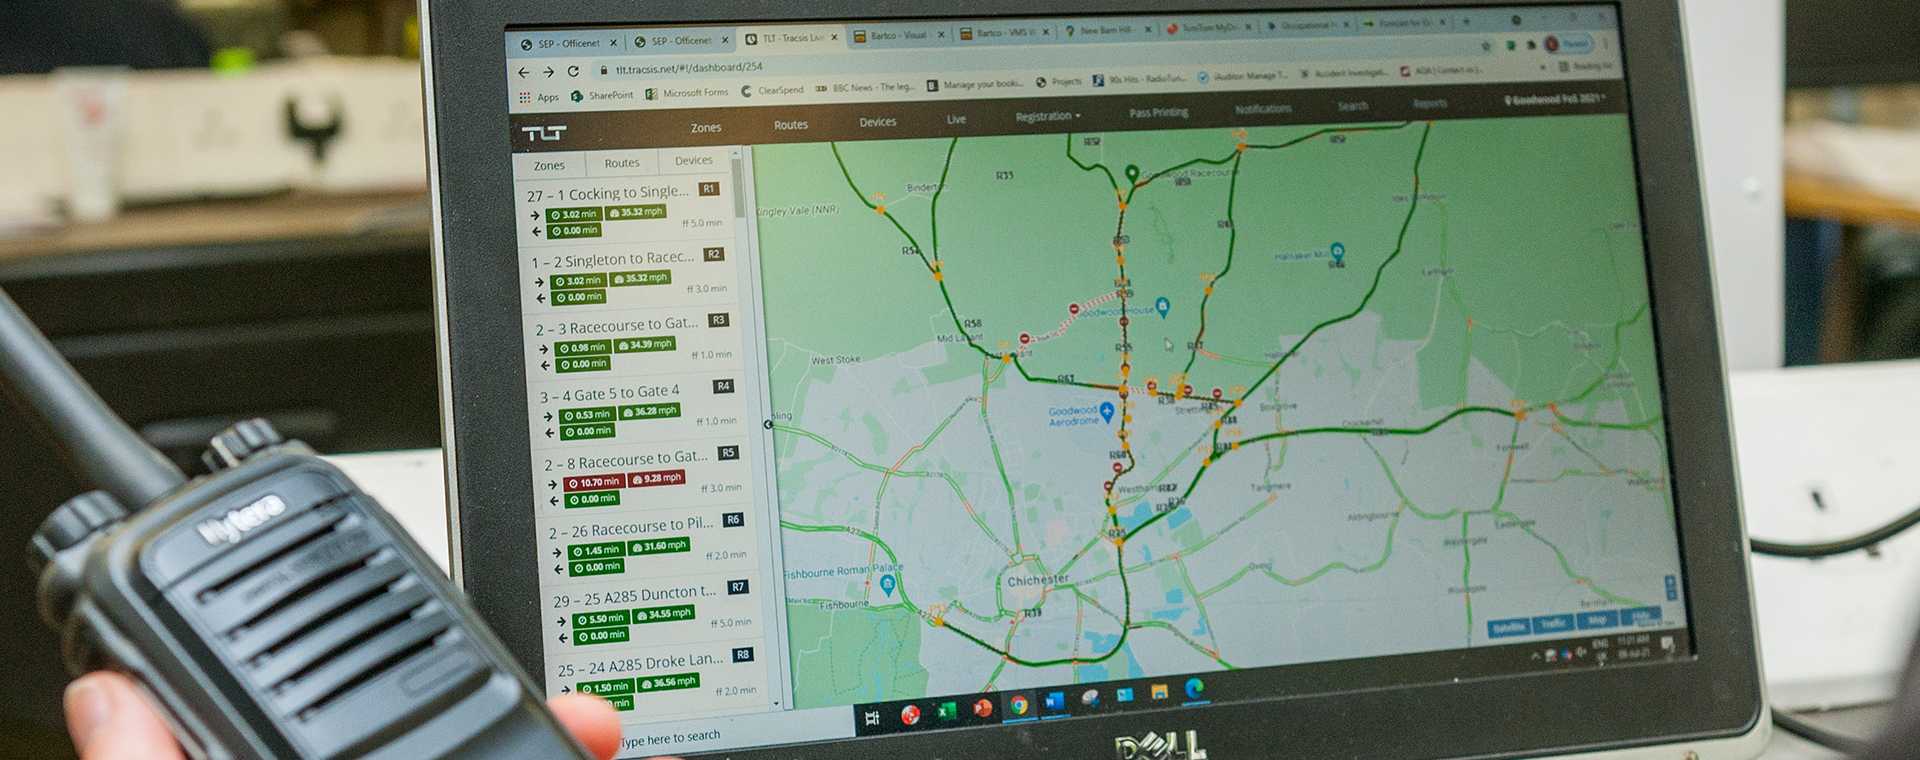 Traffic management software on a computer monitor